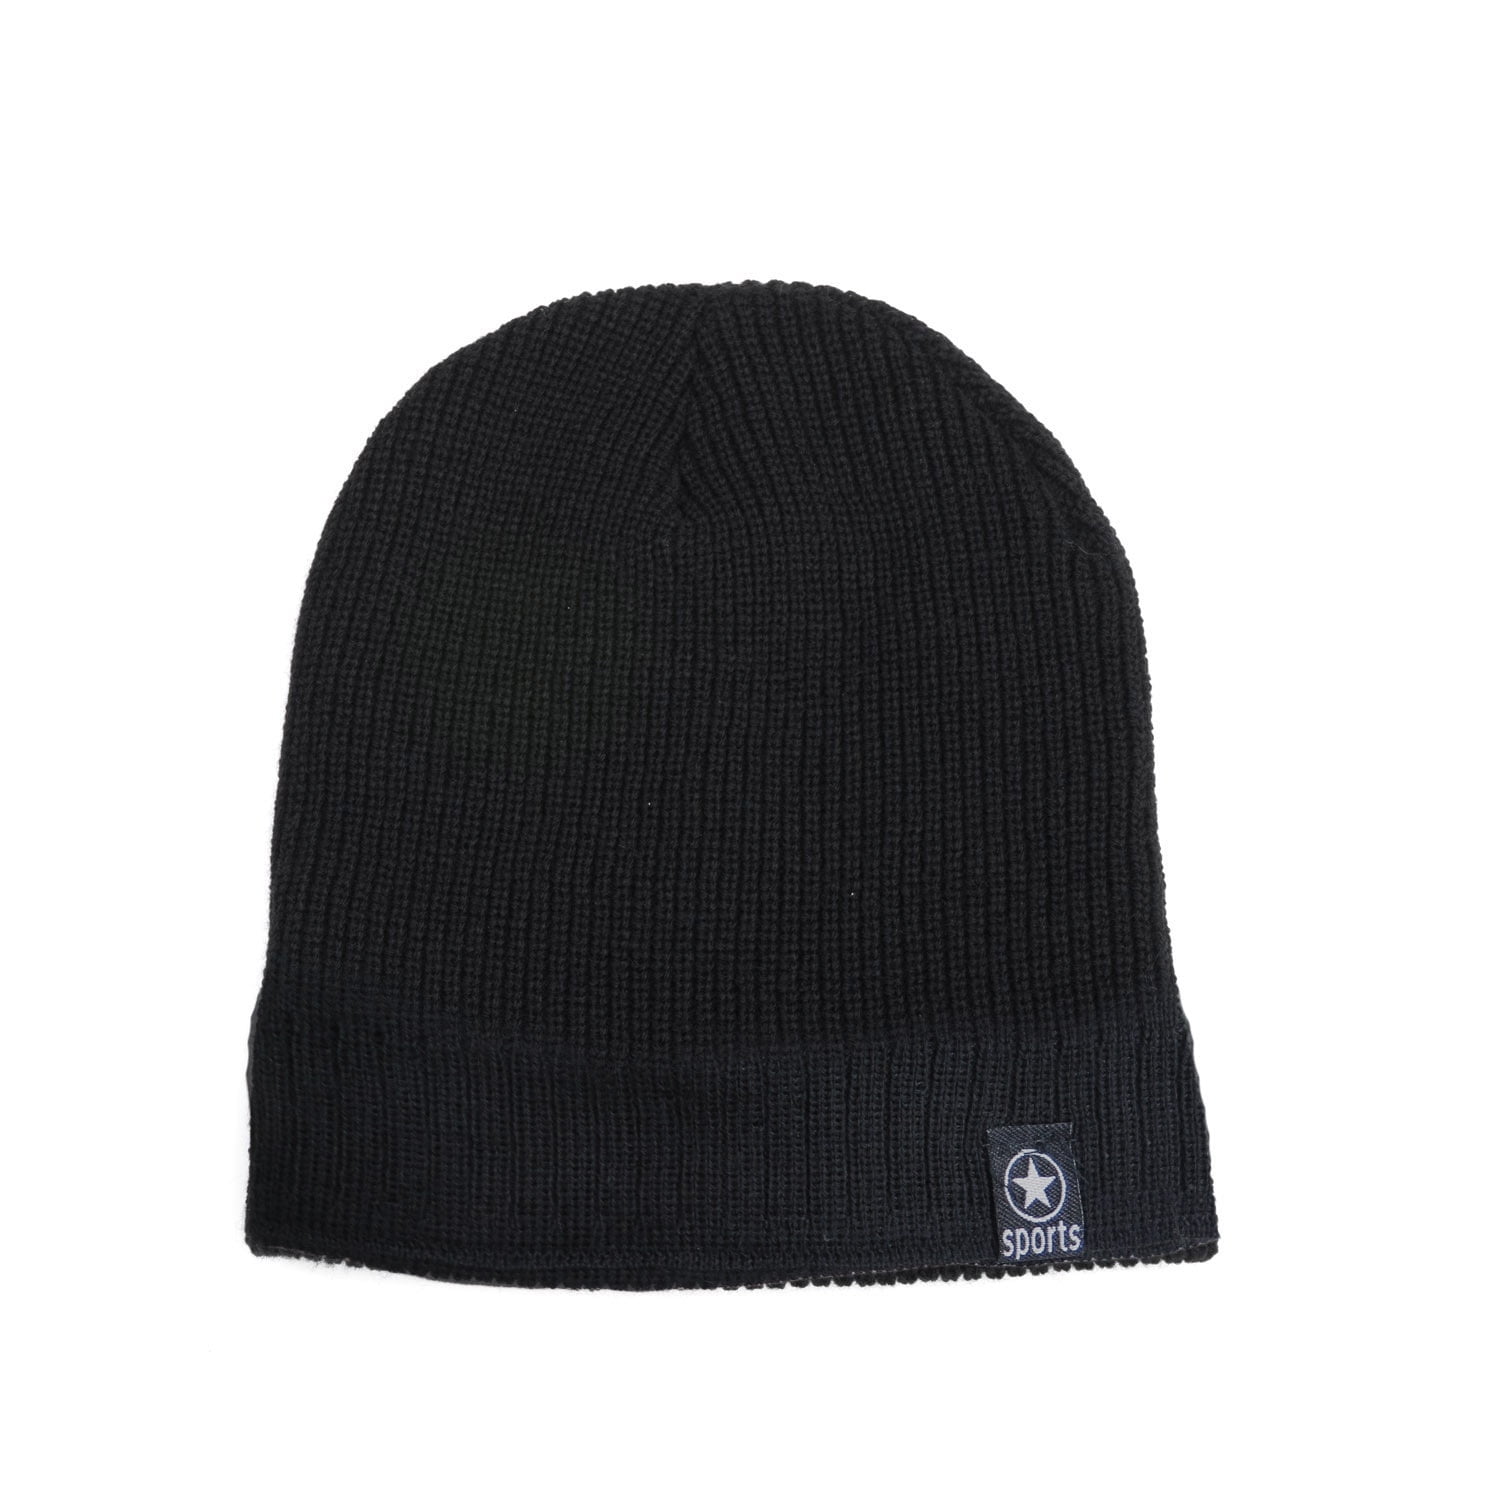 New Era Adult Men Cold Weather Black and White Sport Knit Beanie 